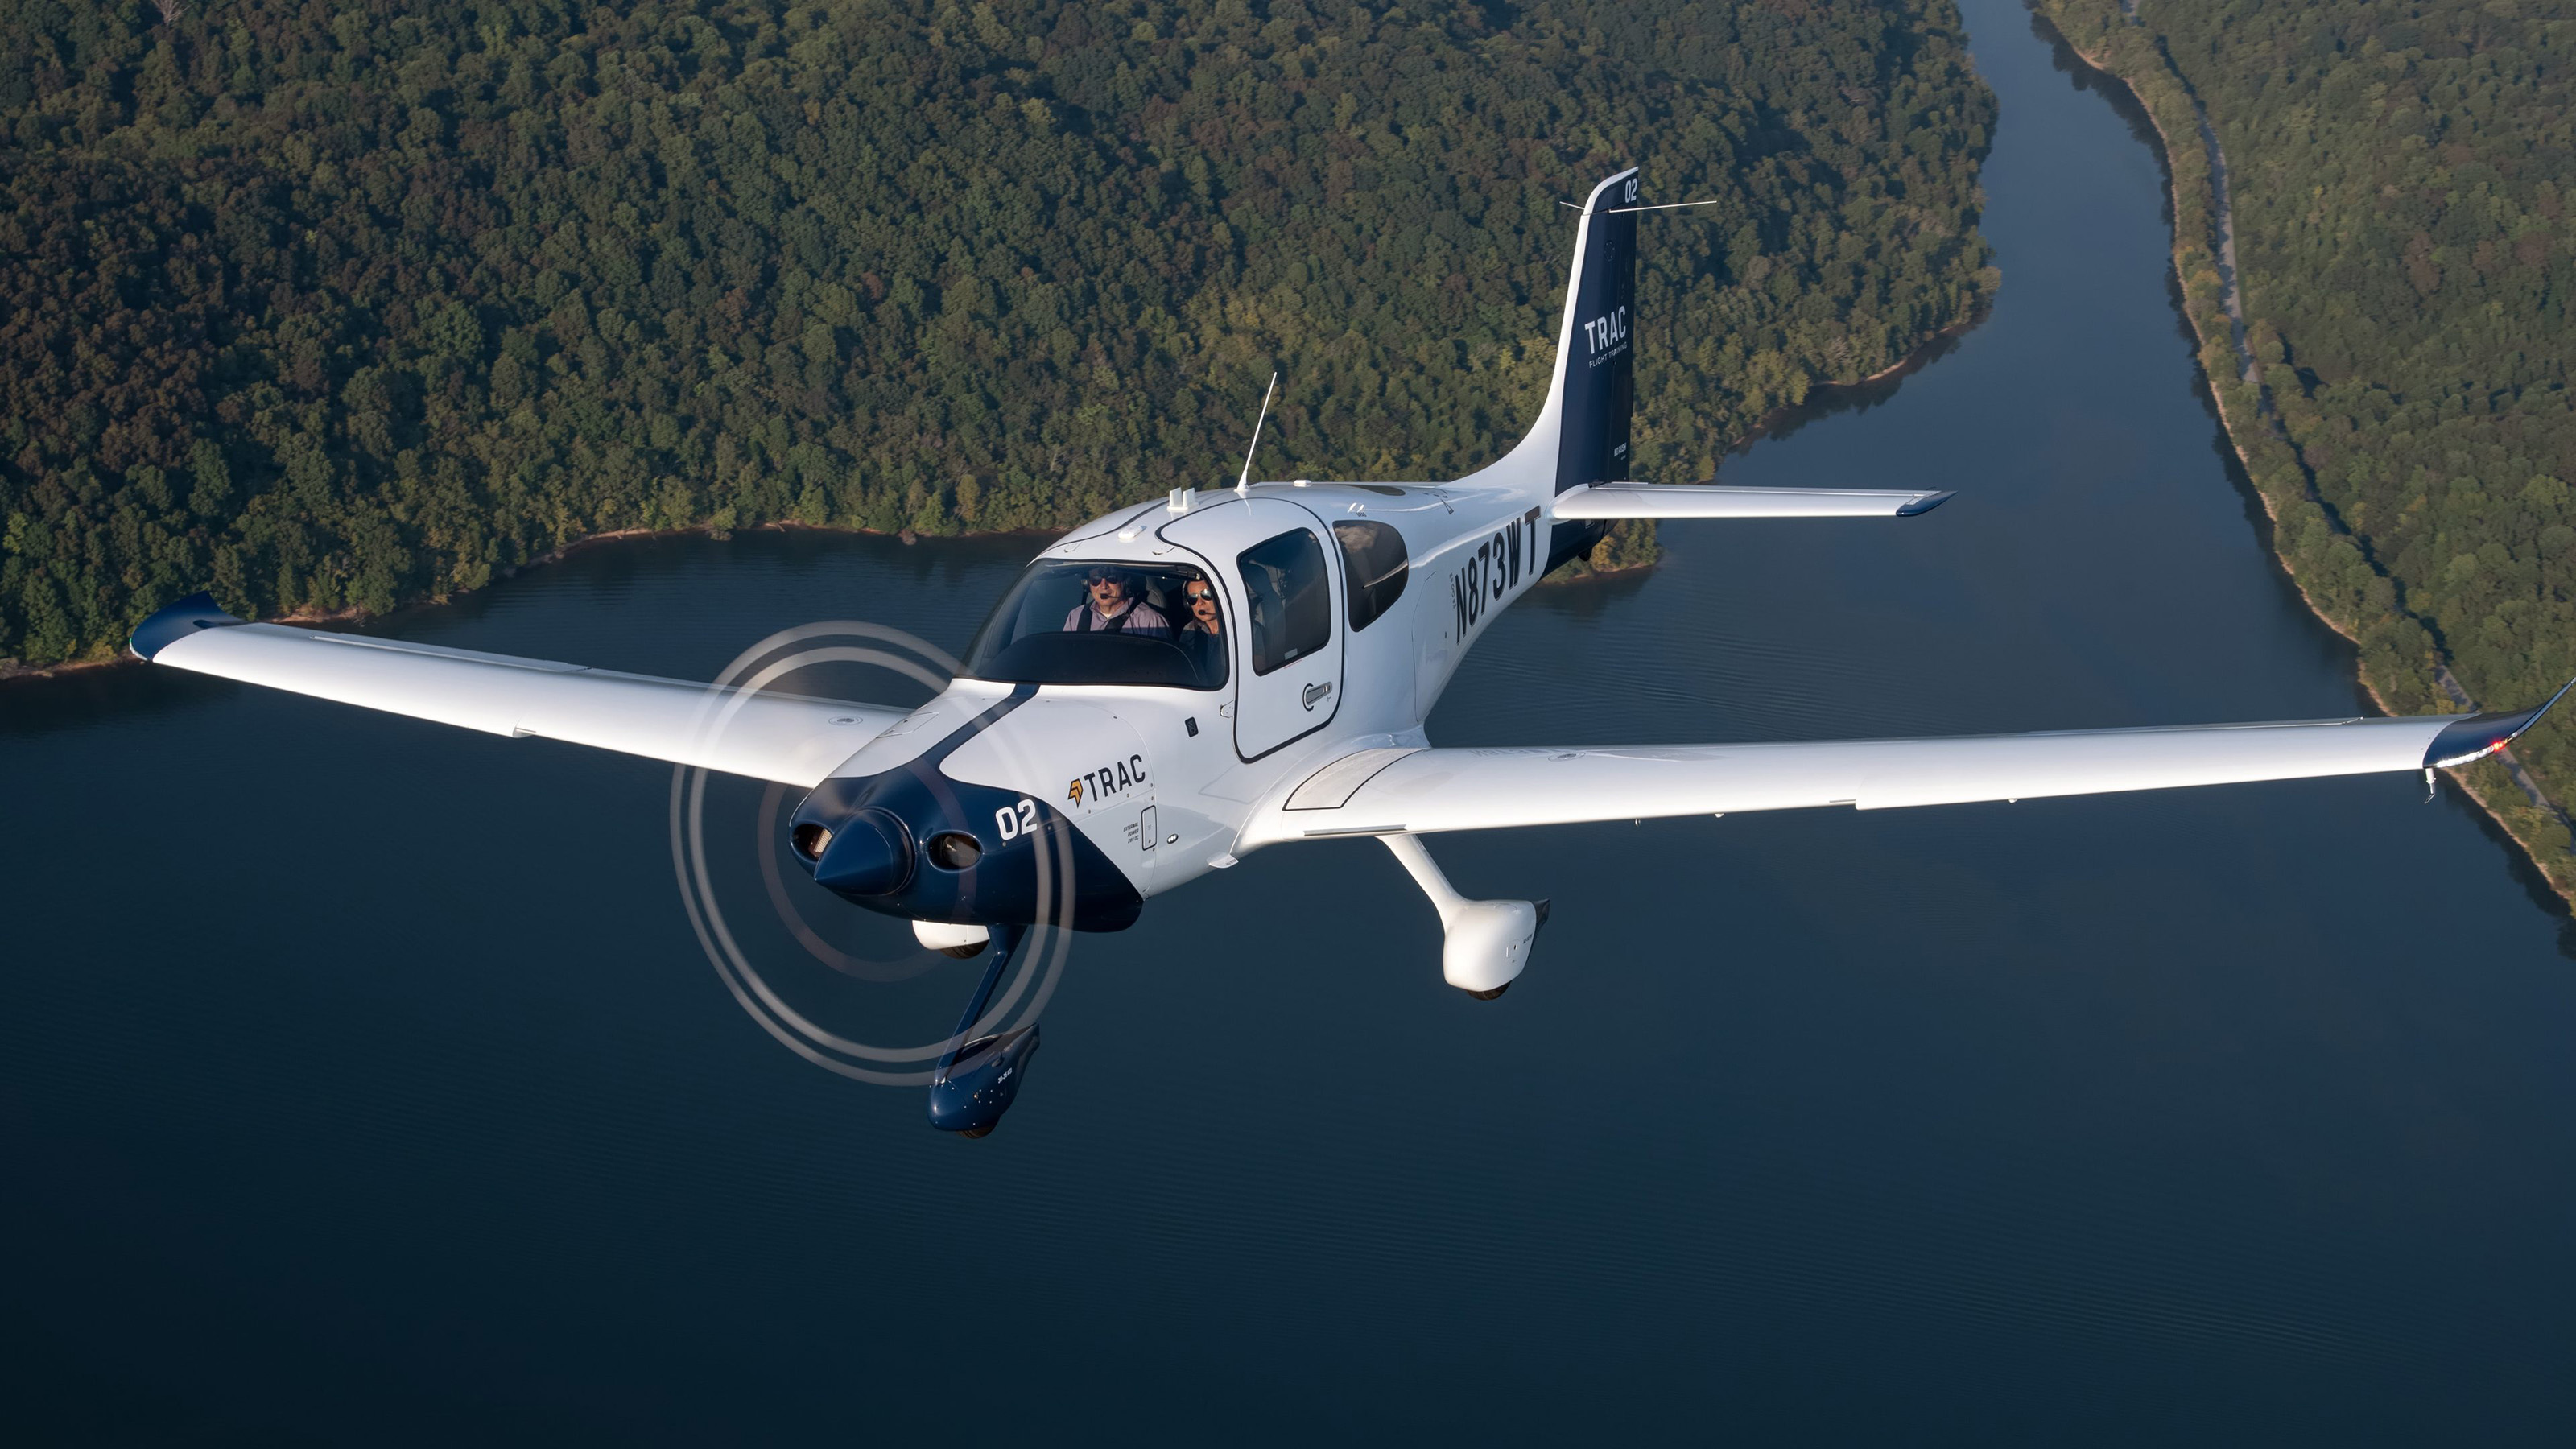 Learn to Fly with Cirrus Aircraft